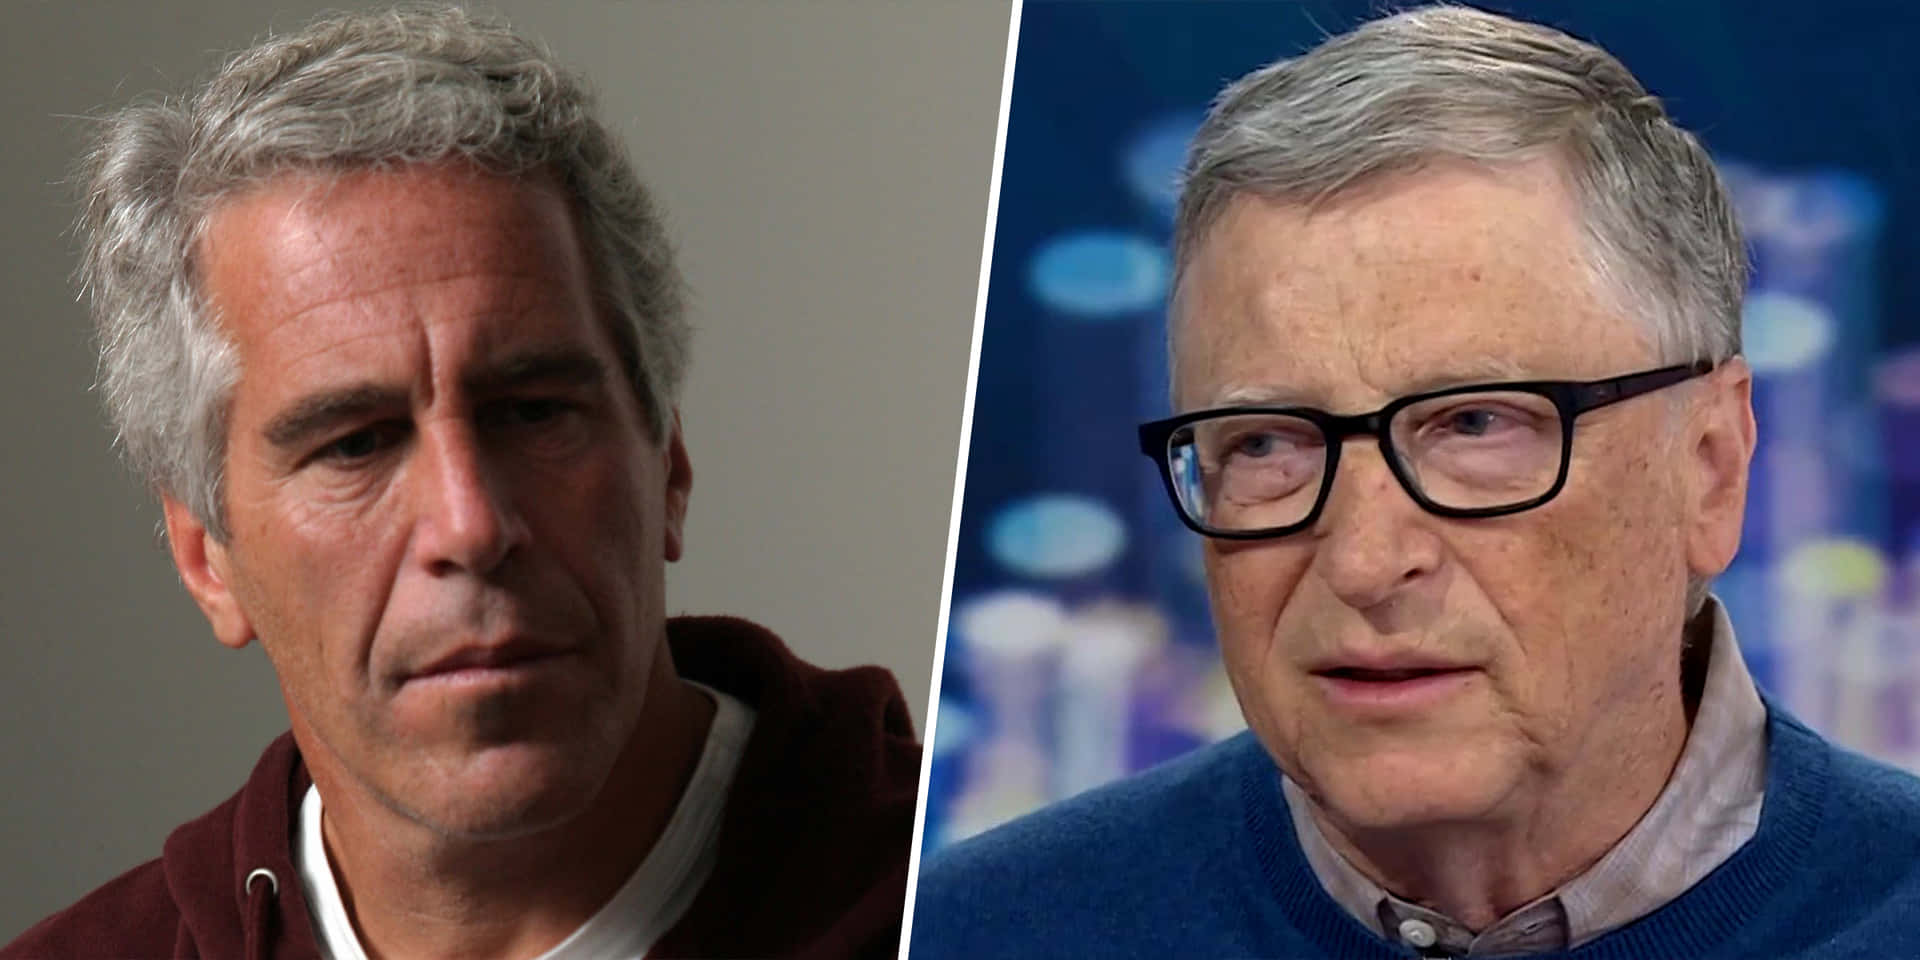 Bill Gates and Jeffery Epstein pictured together